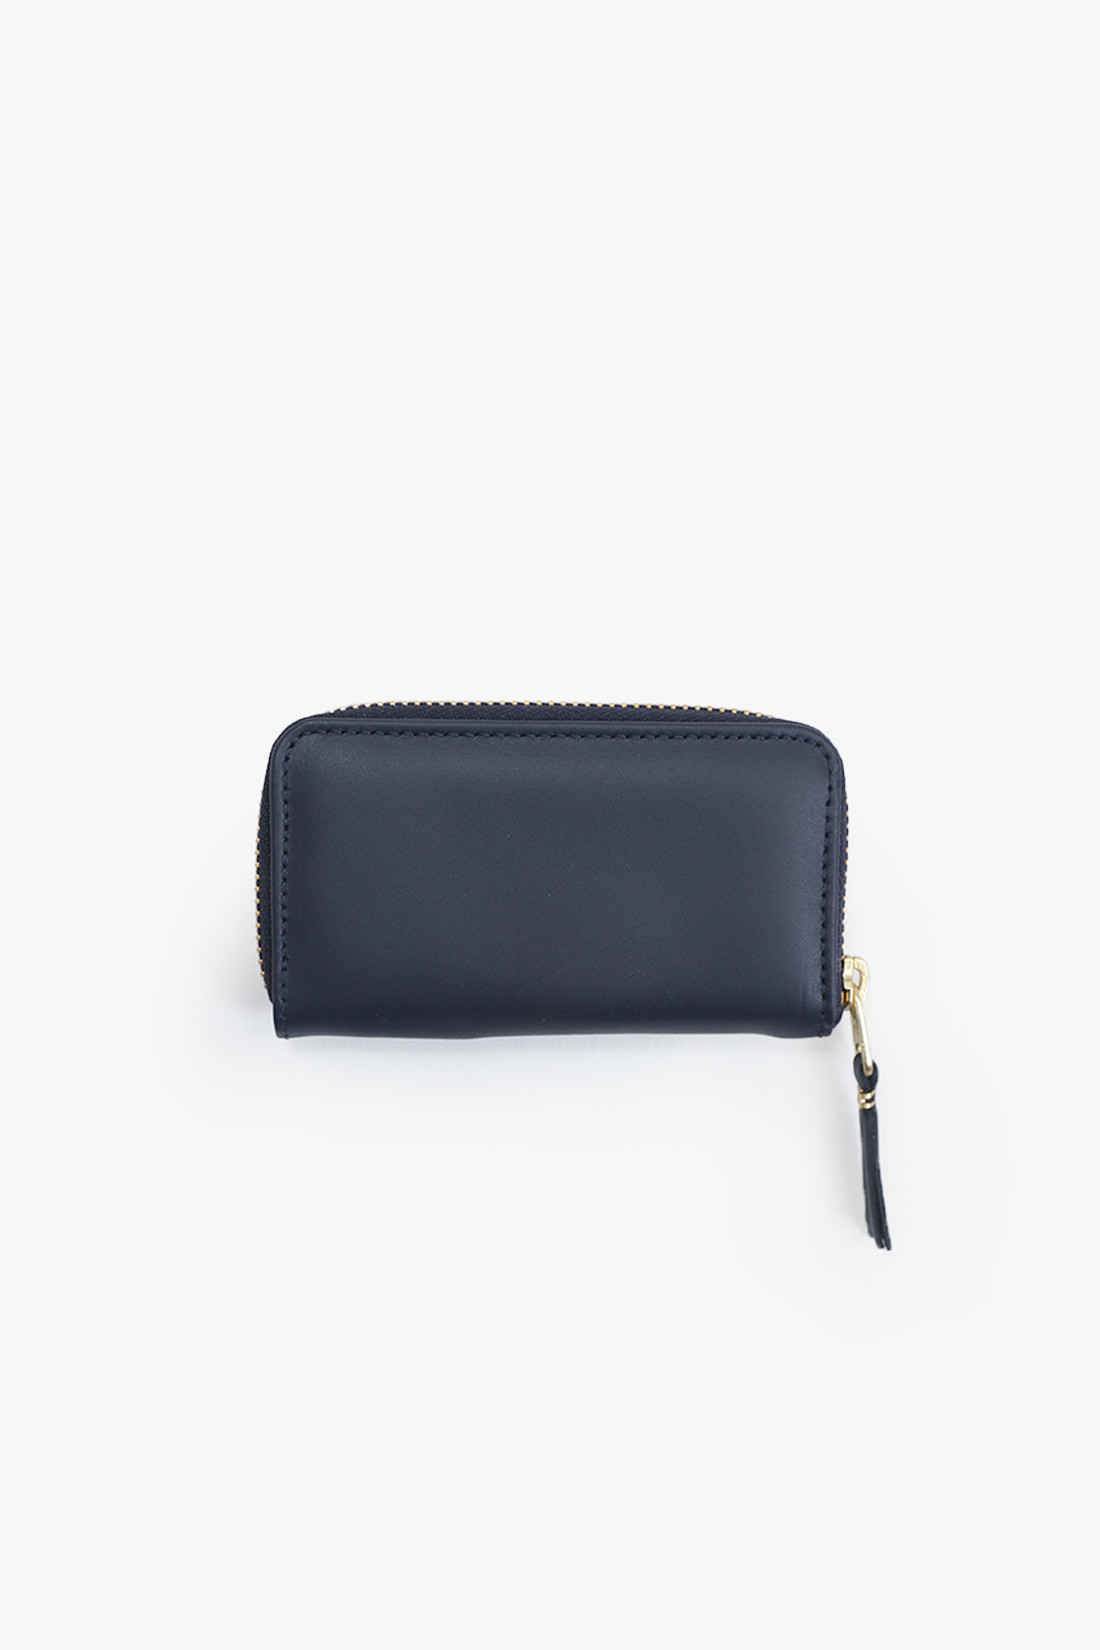 Classic leather line Navy